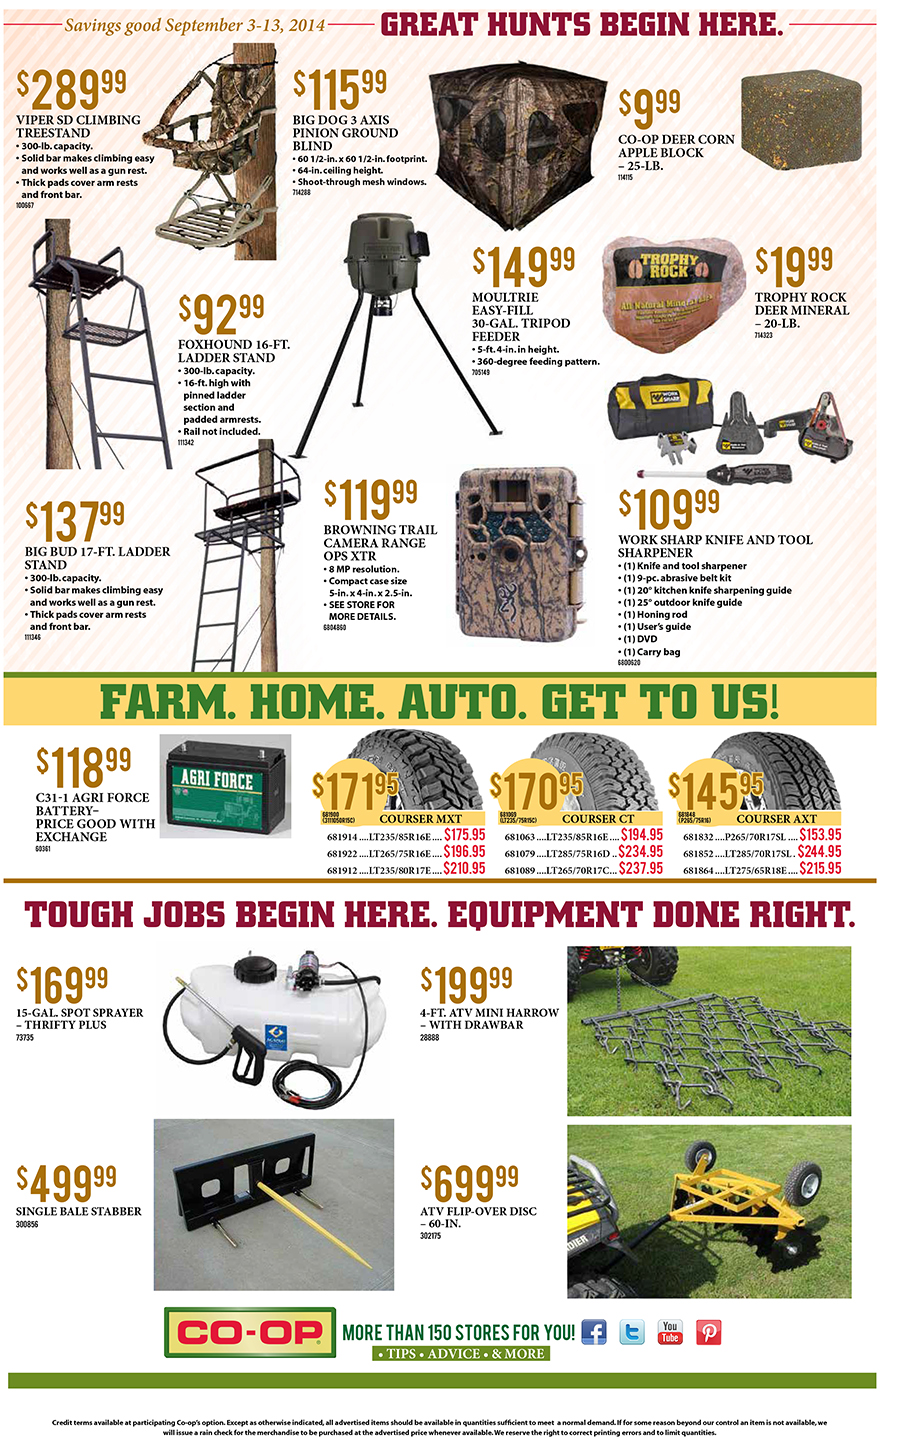 Co-op Flyer Sept 3 2014 Page 2 Large